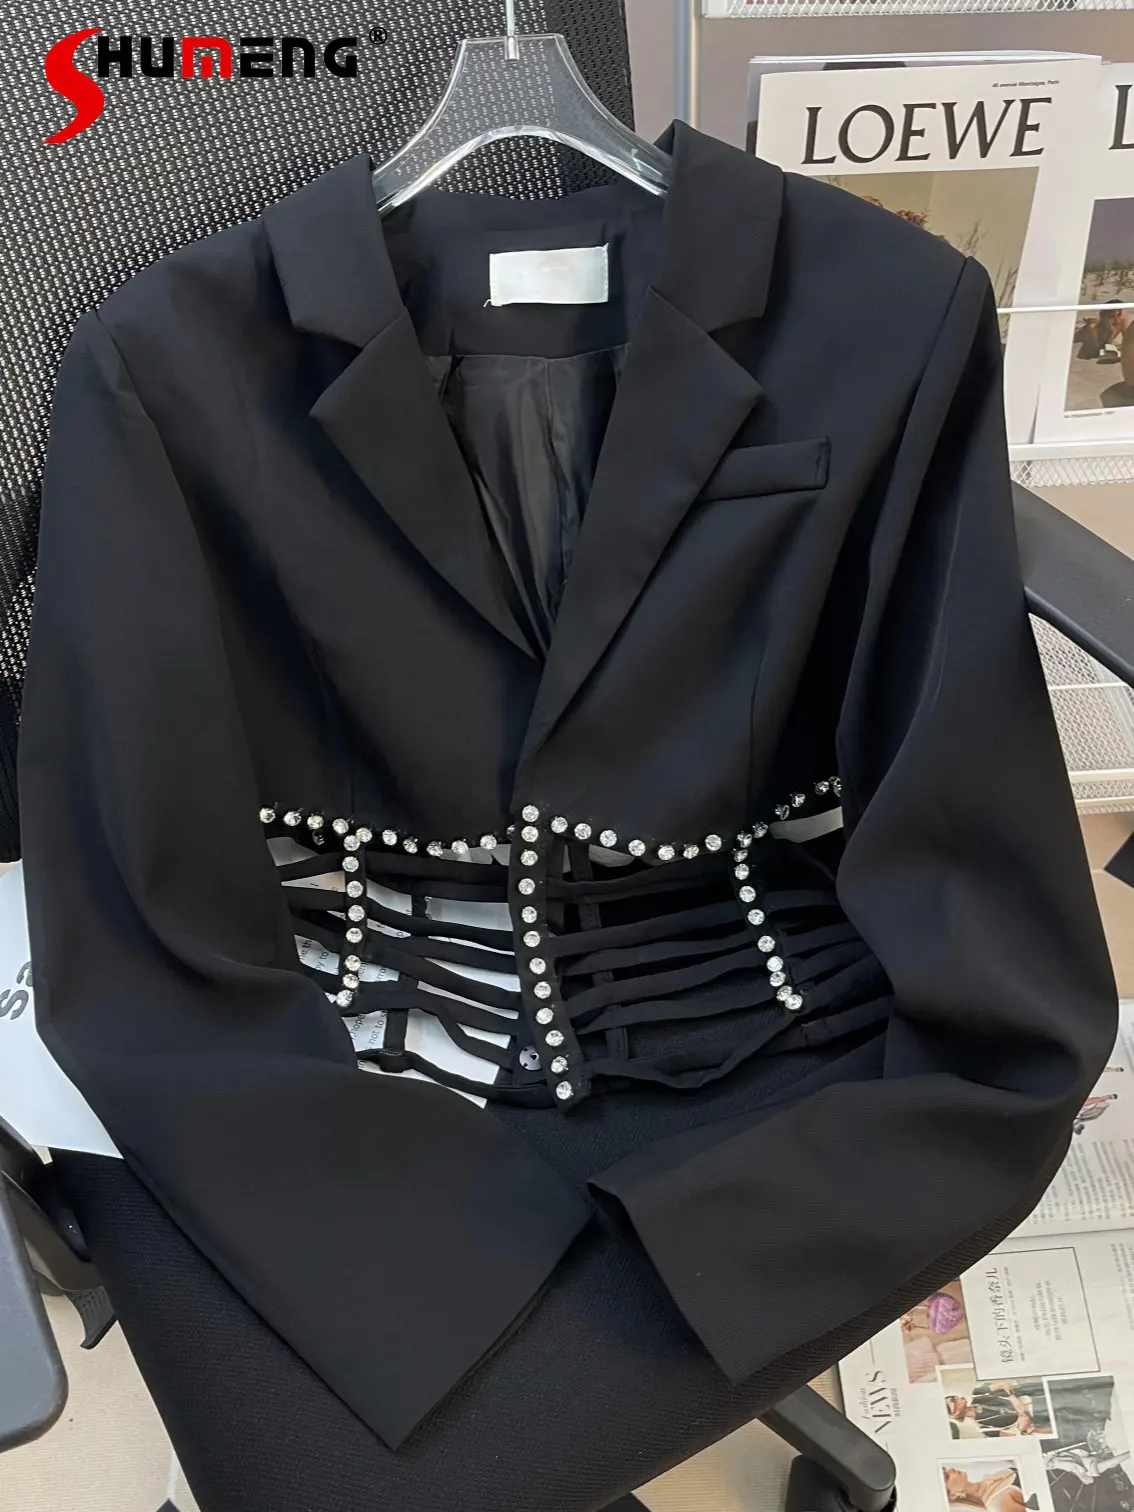 French Style Exquisite Rhinestone Hollow-Out Short Suit Coat Women's Autumn and Winter Elegant Outdoor Black Suit Jacket